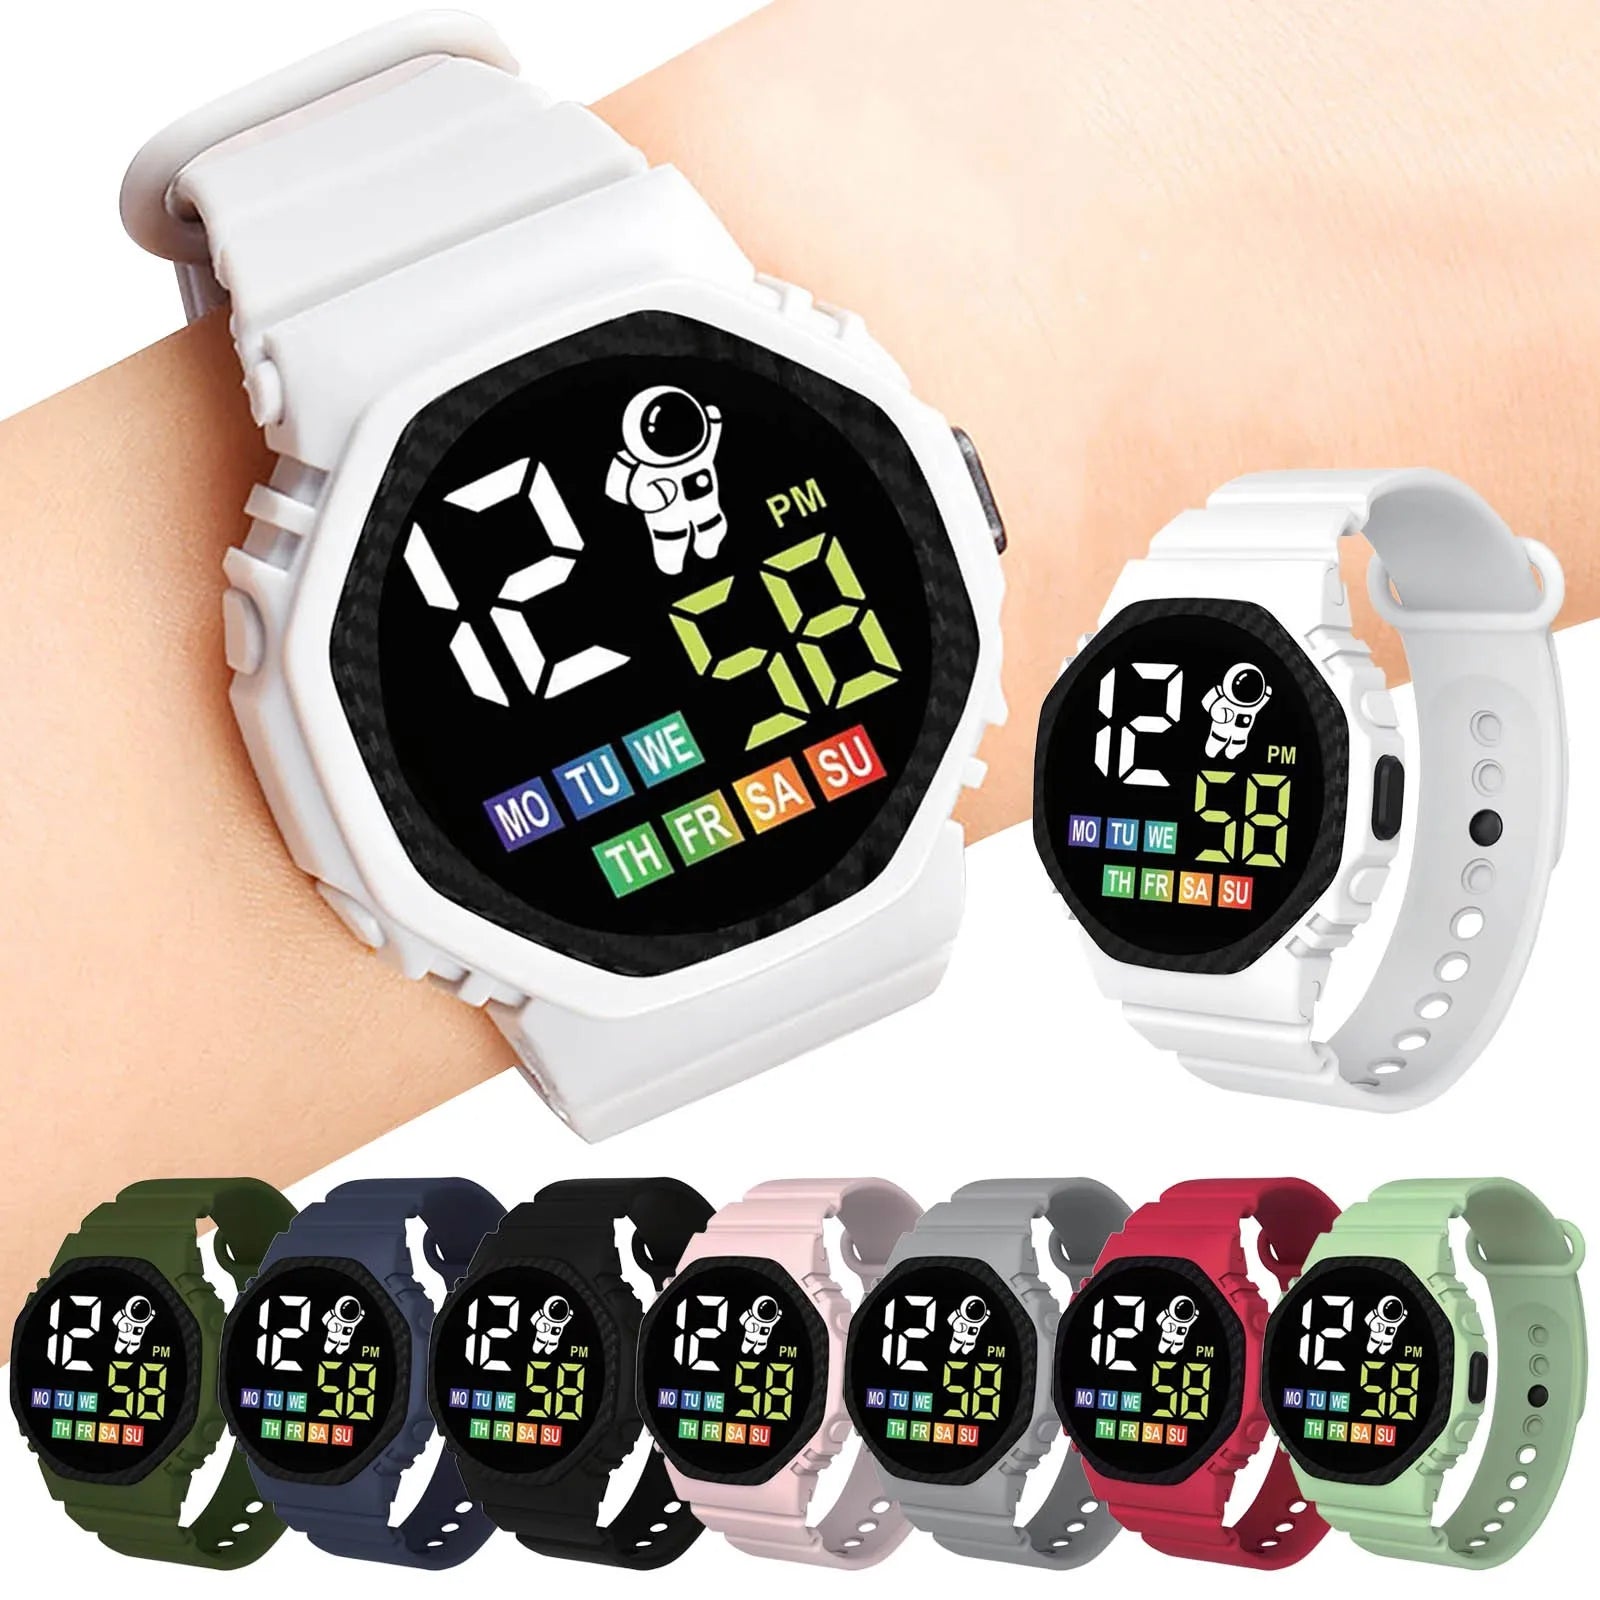 Simple Smart Led Watch Children Digital Wristwatch Kids Silicone Strap Sport Fitness Electronic Watches Heart Rate Clock Watch